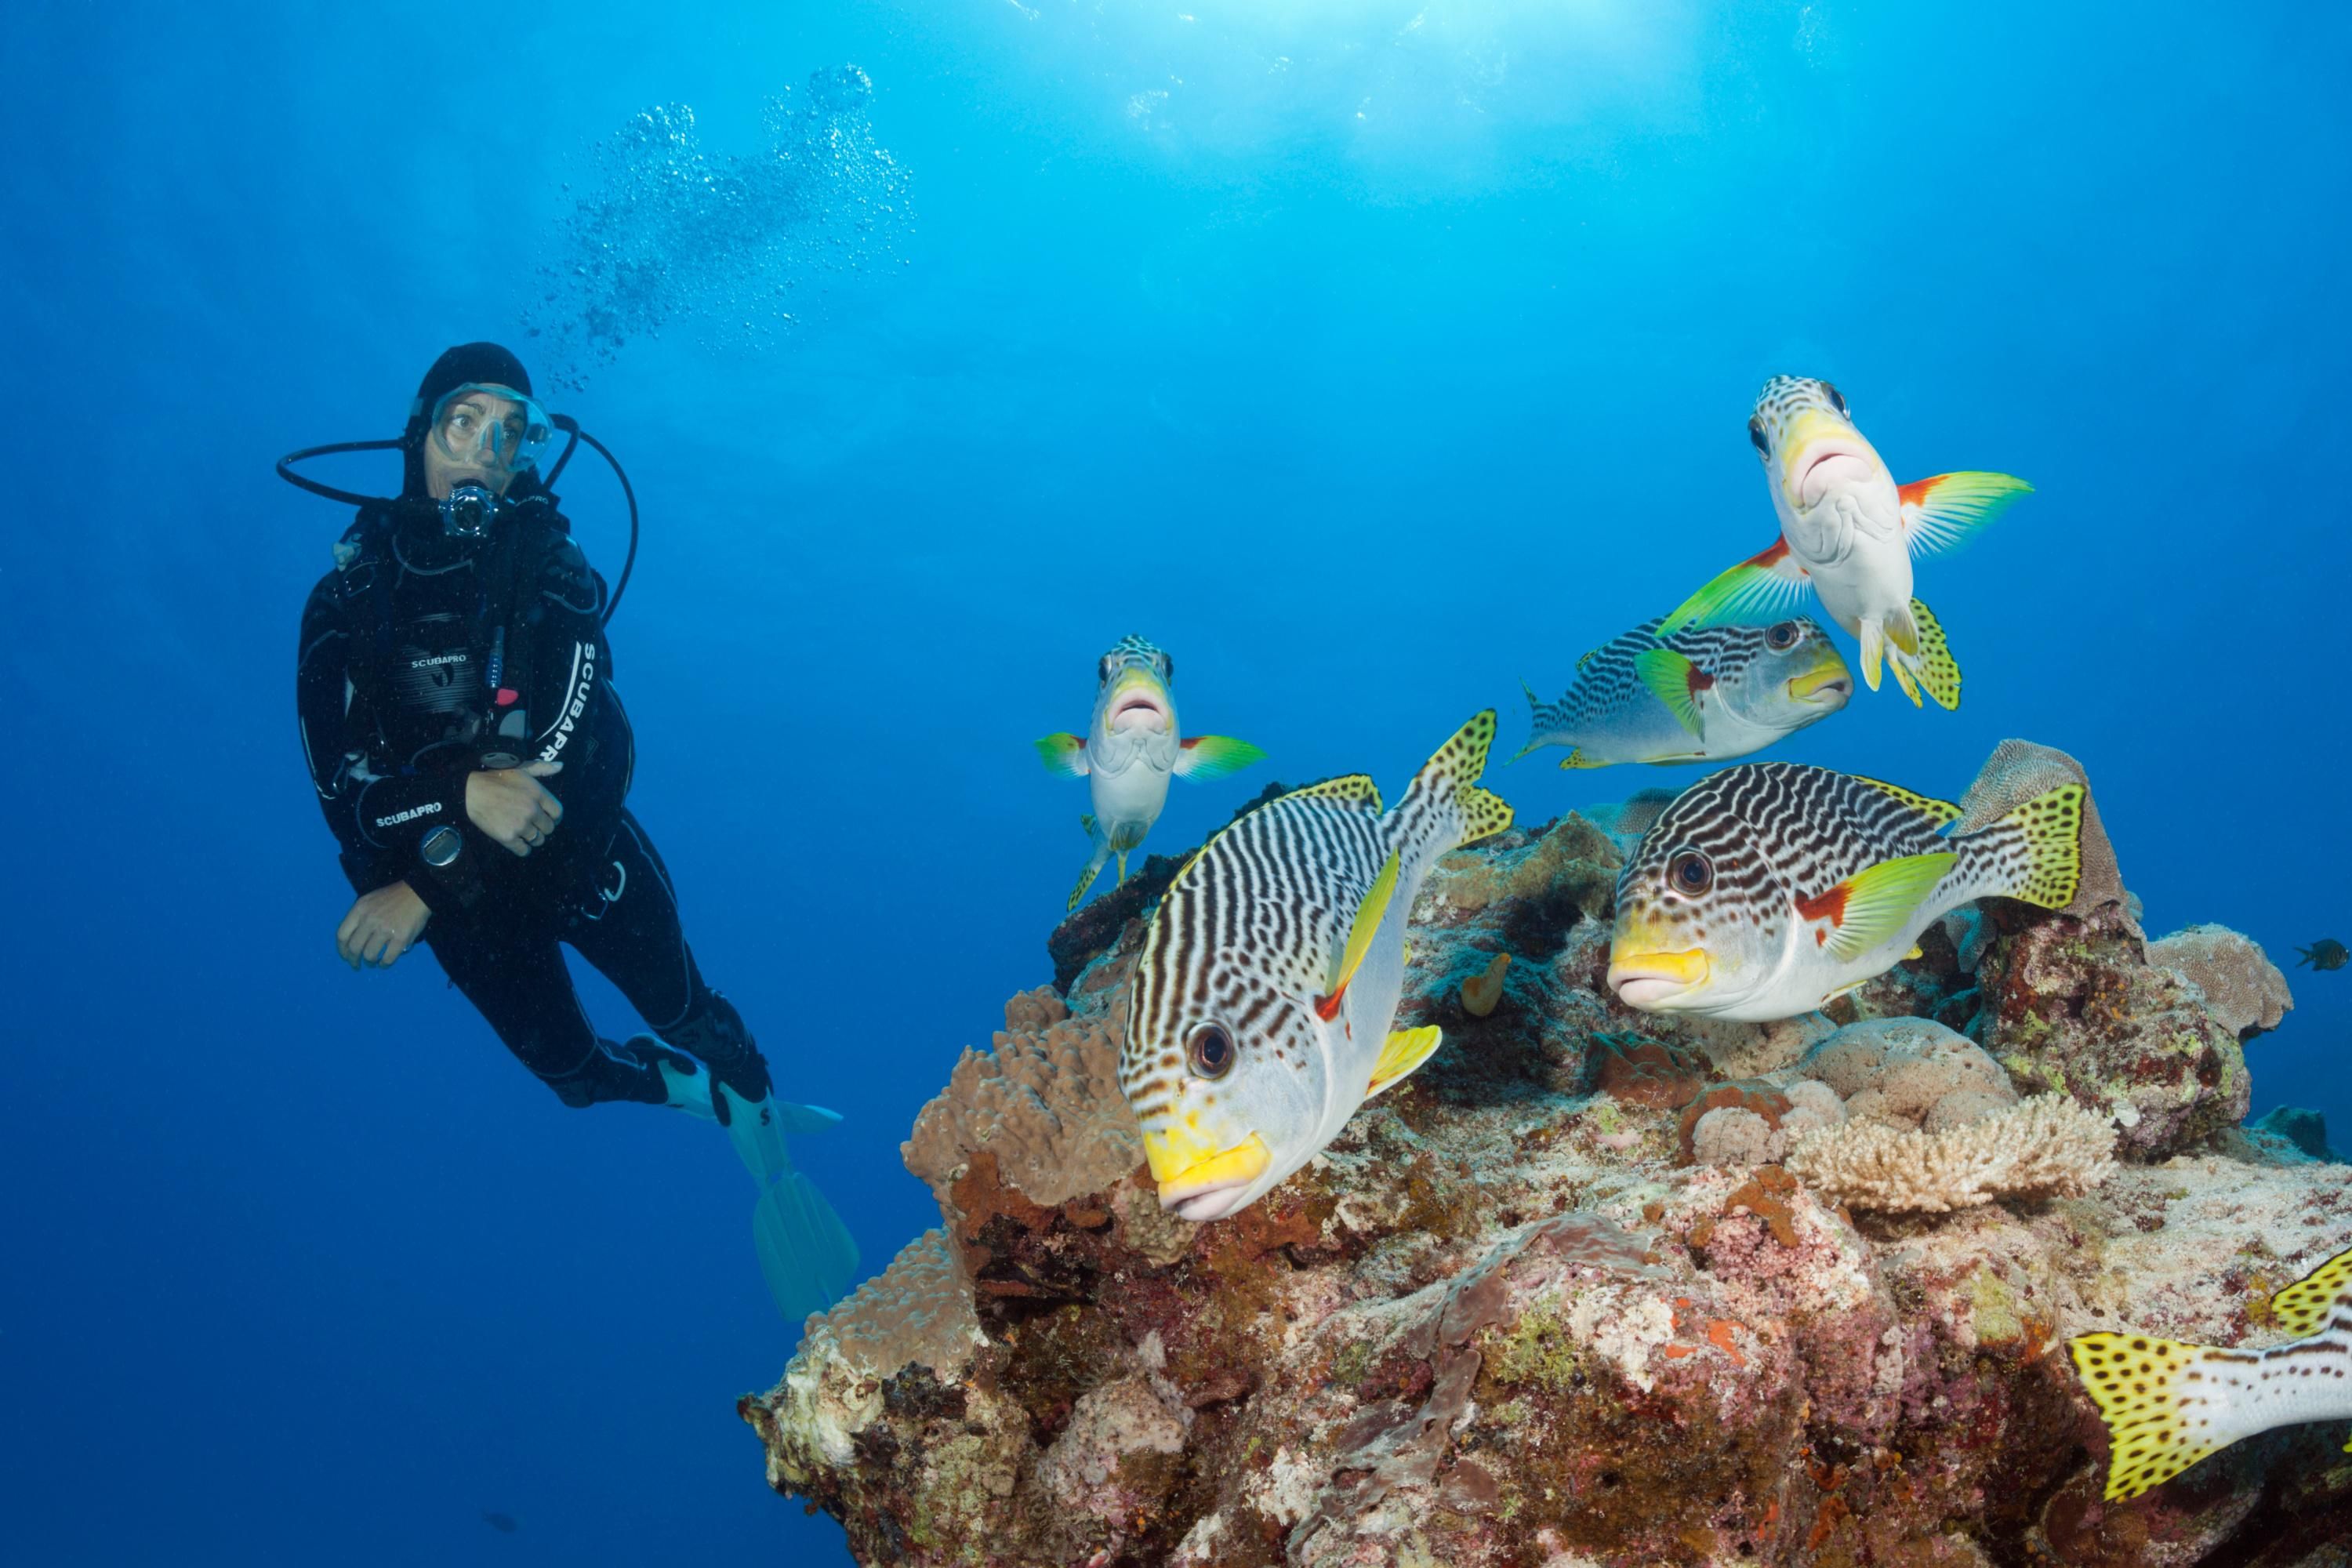 A scuba diver examines fish in the Great Barrier Reef